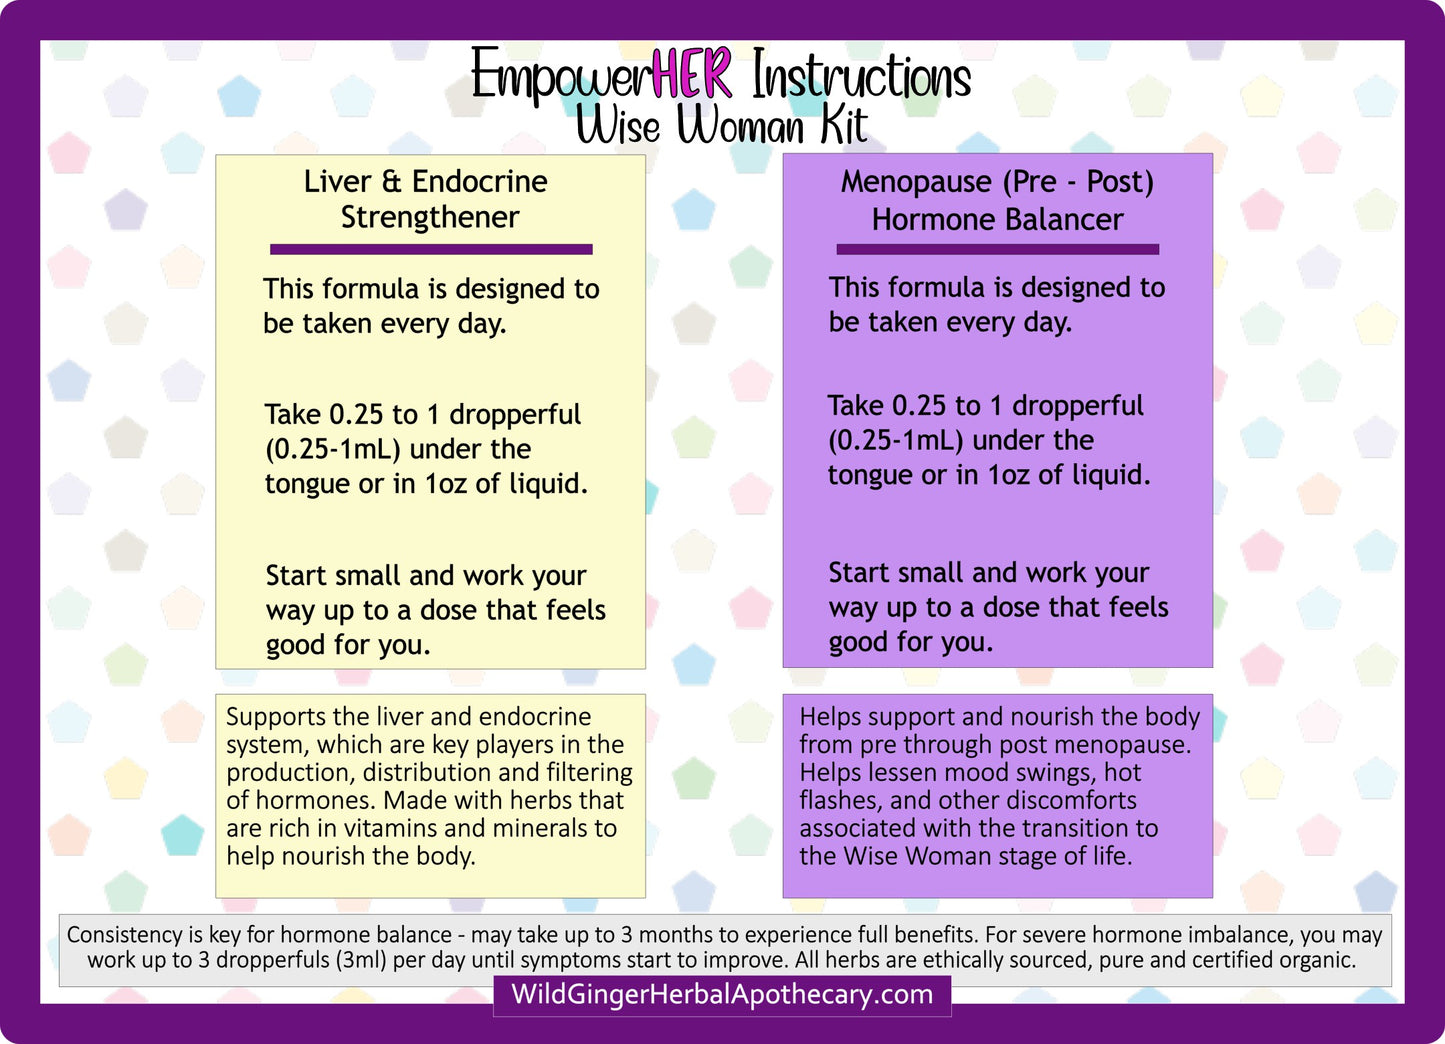 Polka Dot background with instructions on how to use the products and what they are helping with.